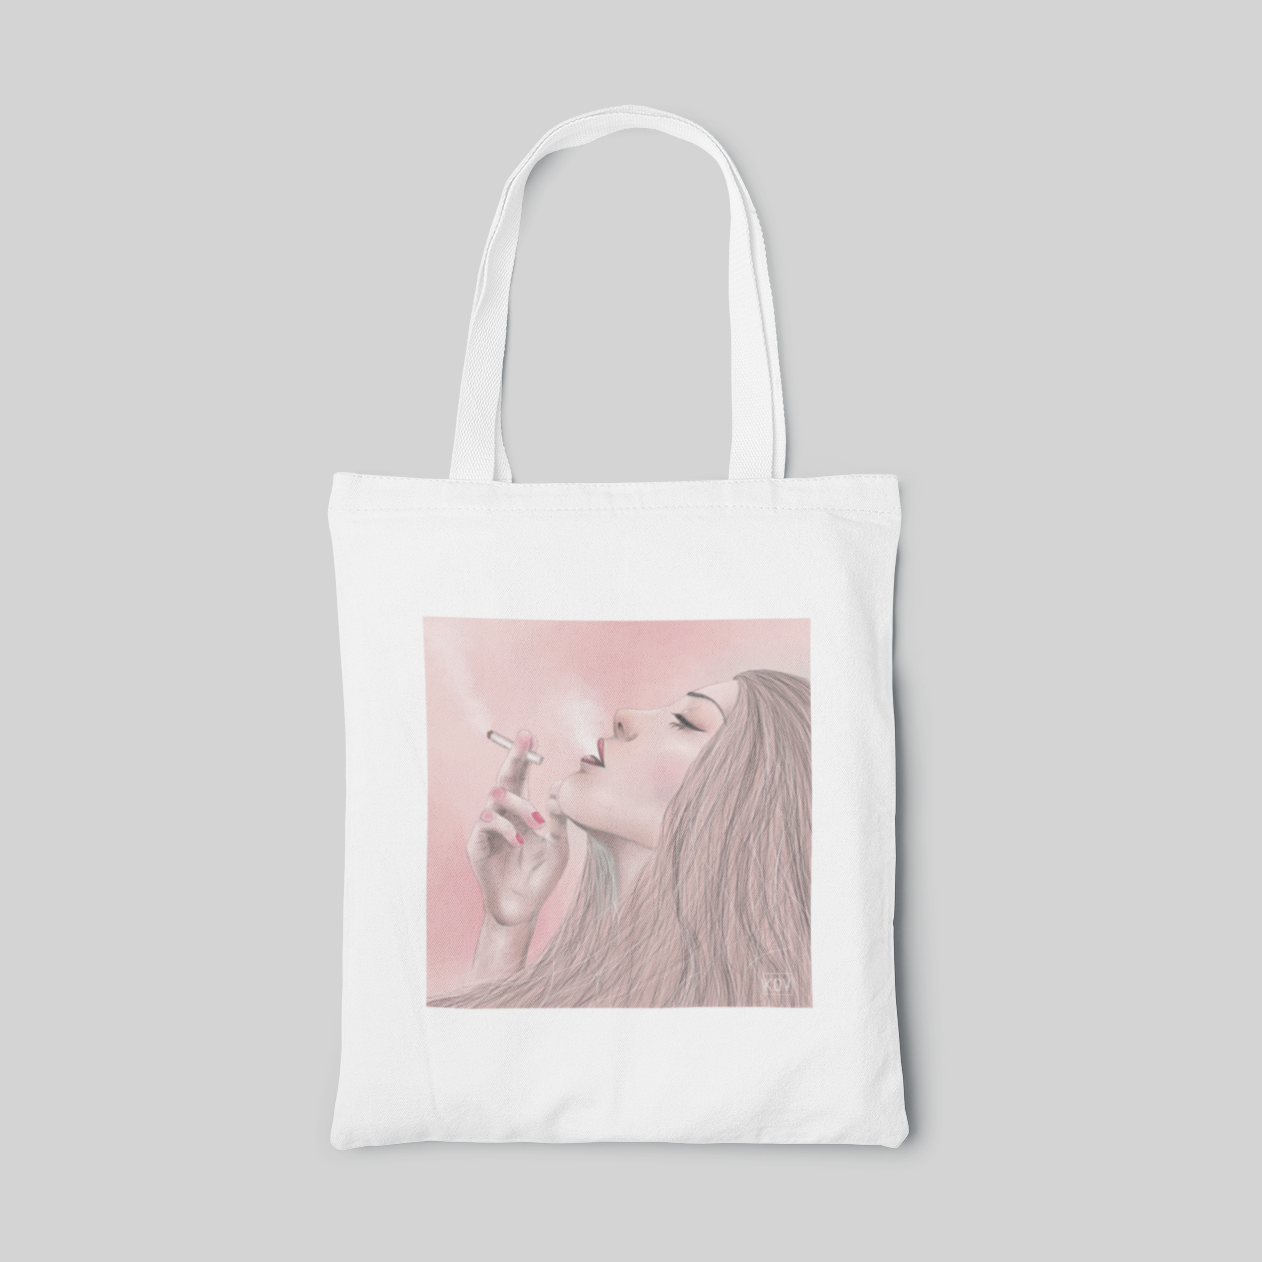 Mujer Nocturna Tote Bag